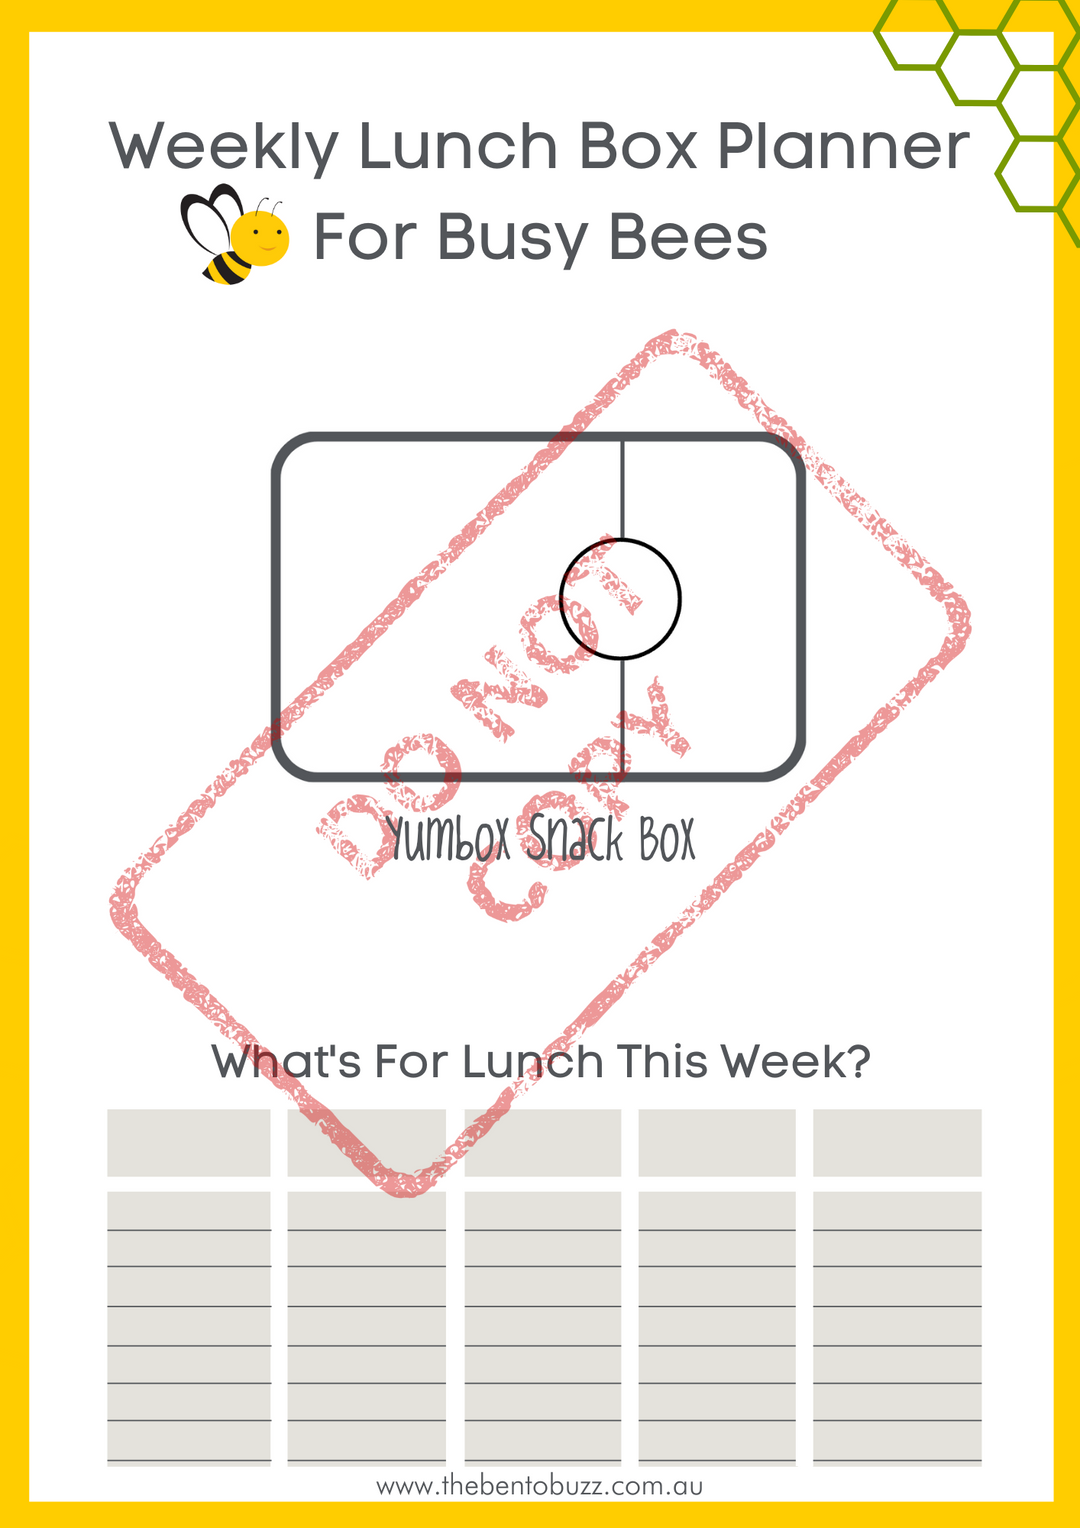 Download & Print Lunch Box Planner - Yumbox Snack Box